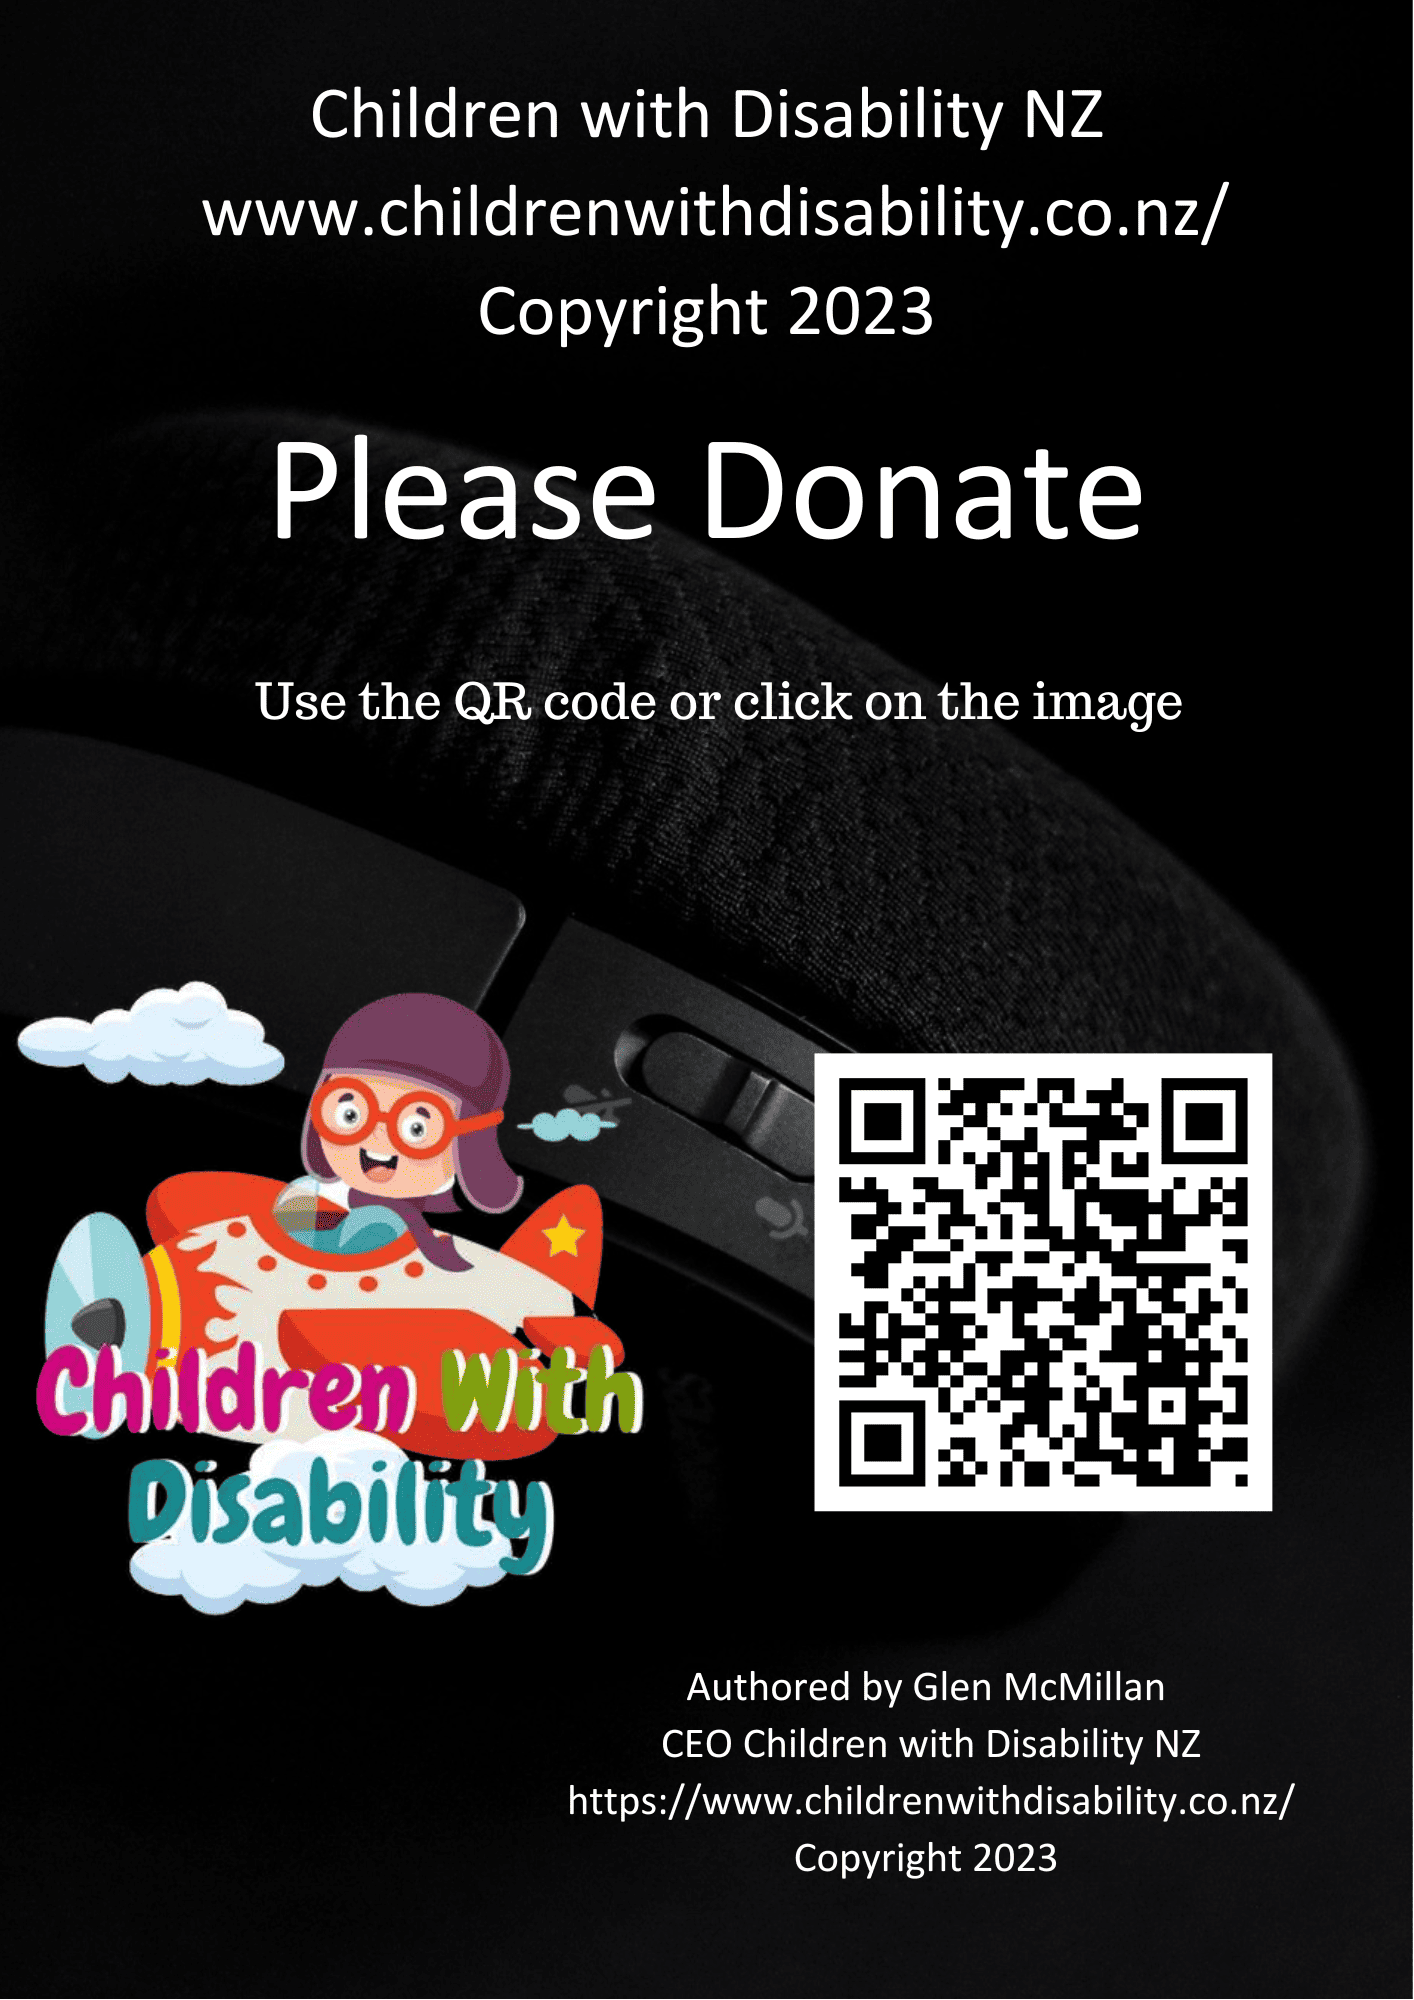 Please donate to Children with Disability NZ